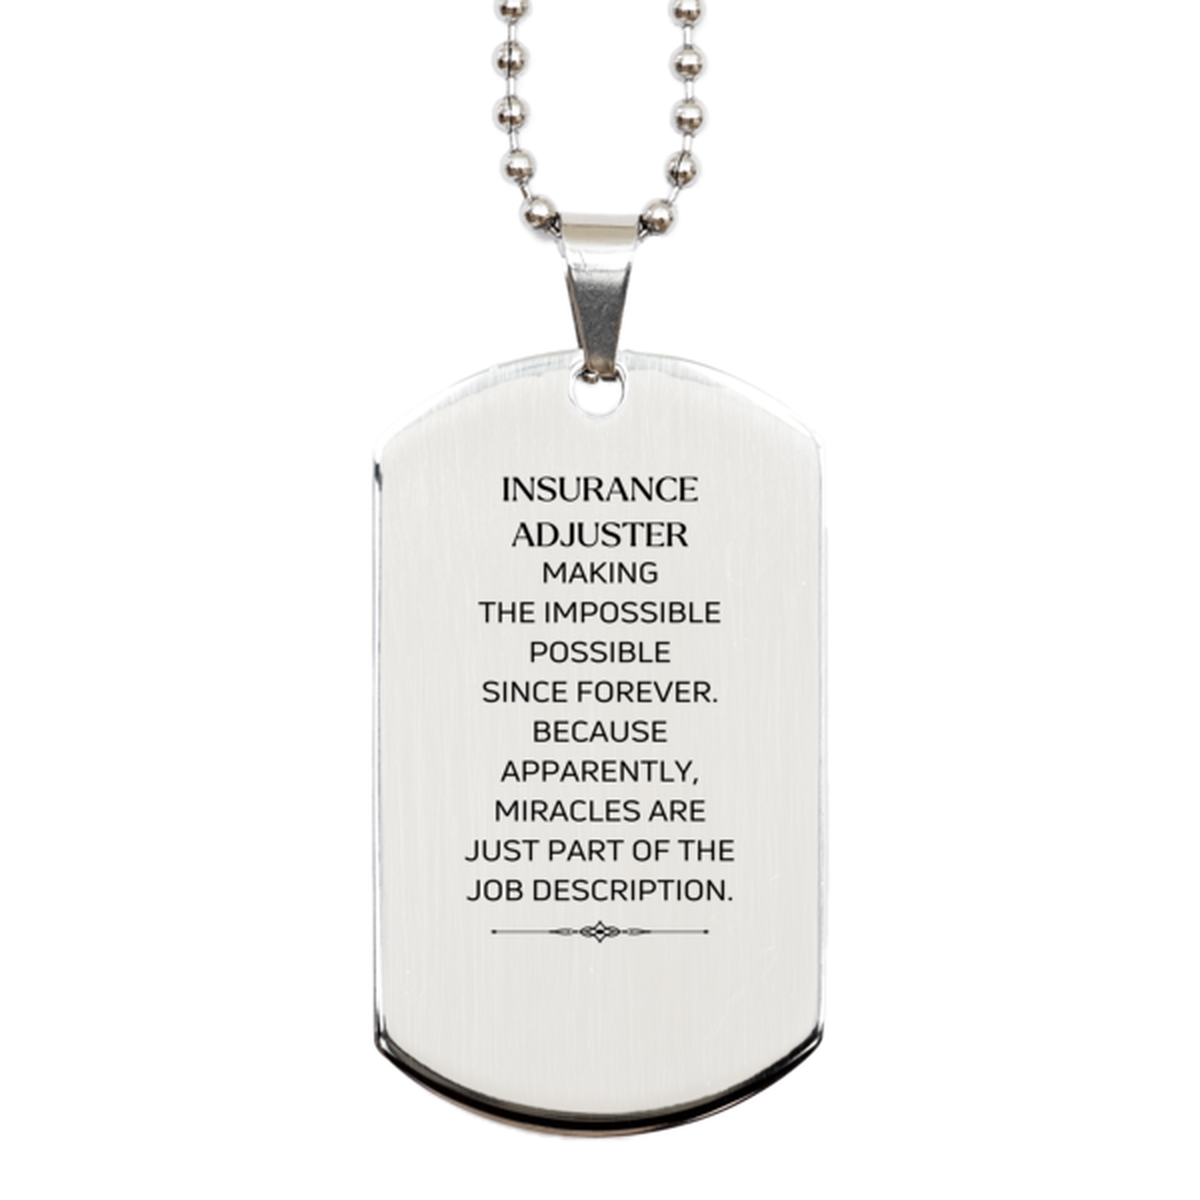 Funny Insurance Adjuster Gifts, Miracles are just part of the job description, Inspirational Birthday Silver Dog Tag For Insurance Adjuster, Men, Women, Coworkers, Friends, Boss